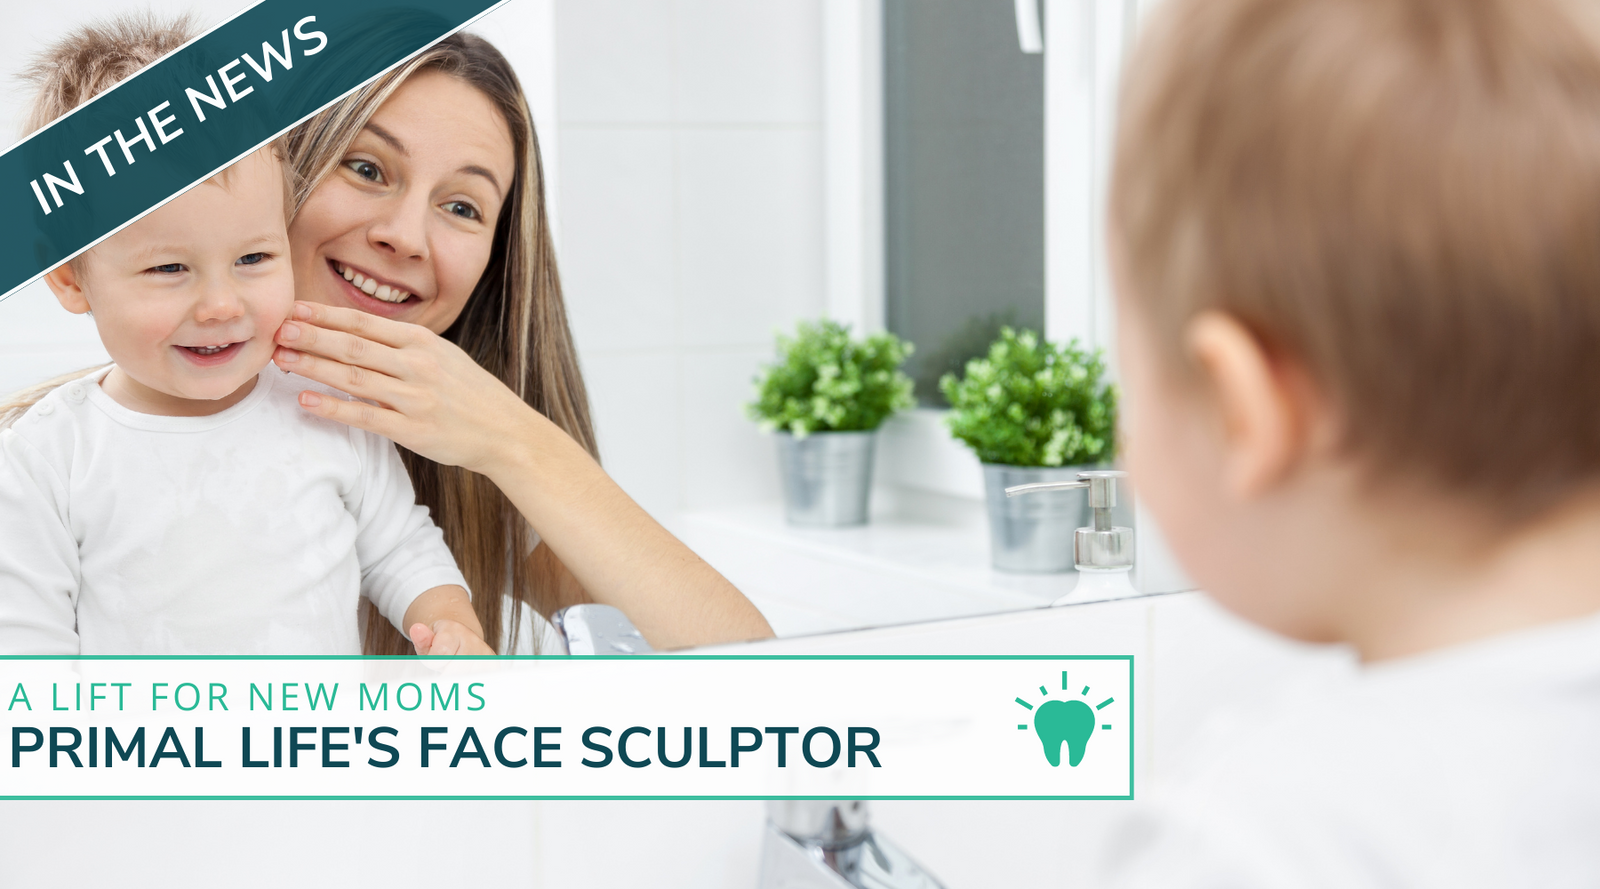 A Lift For New Moms - Primal Life's Face Sculptor